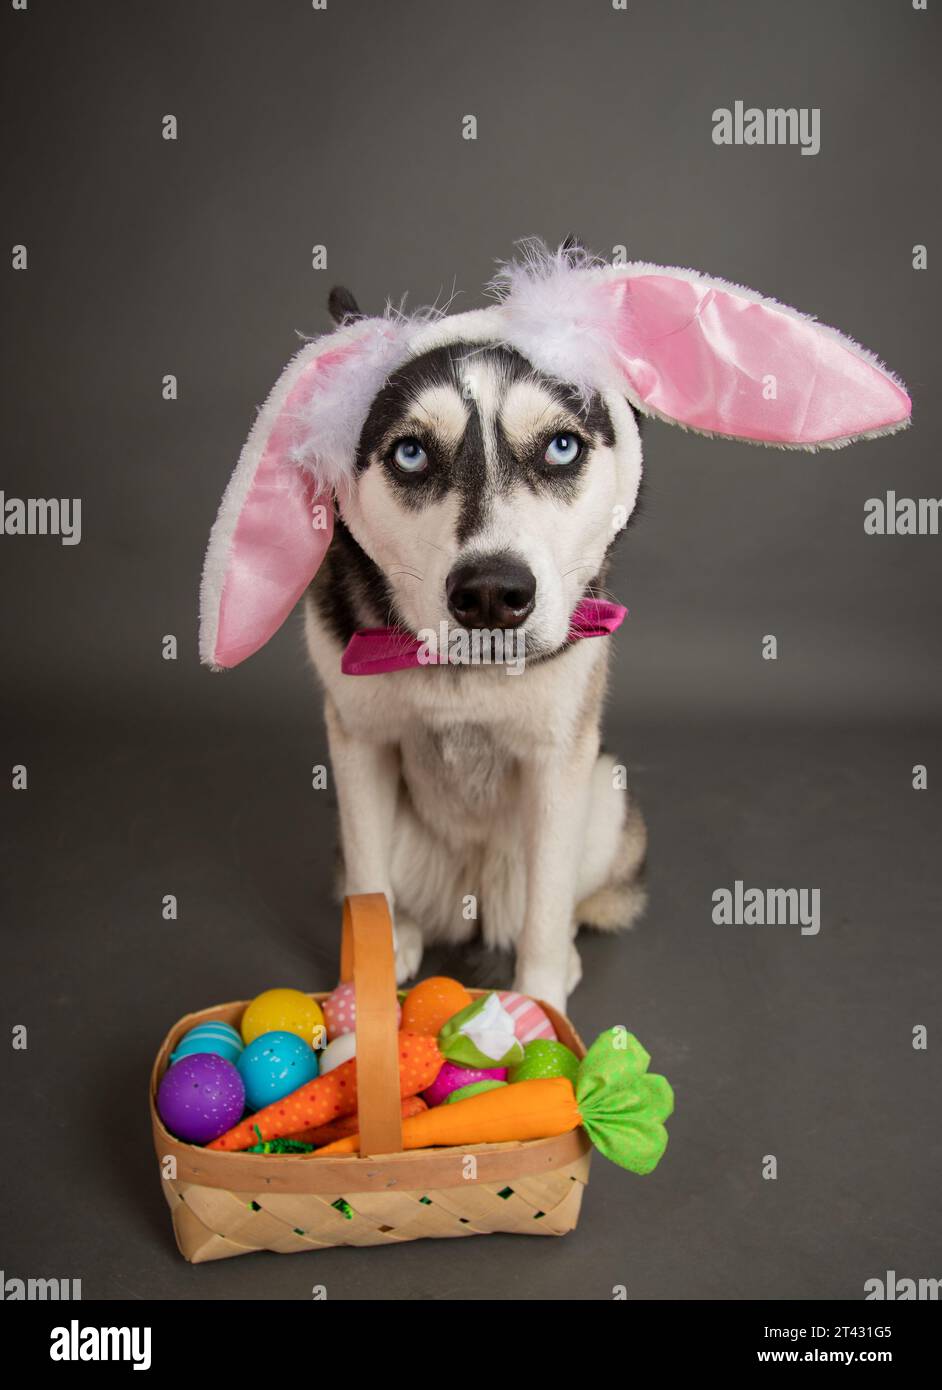 Sad siberian husky dog wearing Easter bunny ears sitting next to a basket filled with painted Easter eggs and carrots Stock Photo